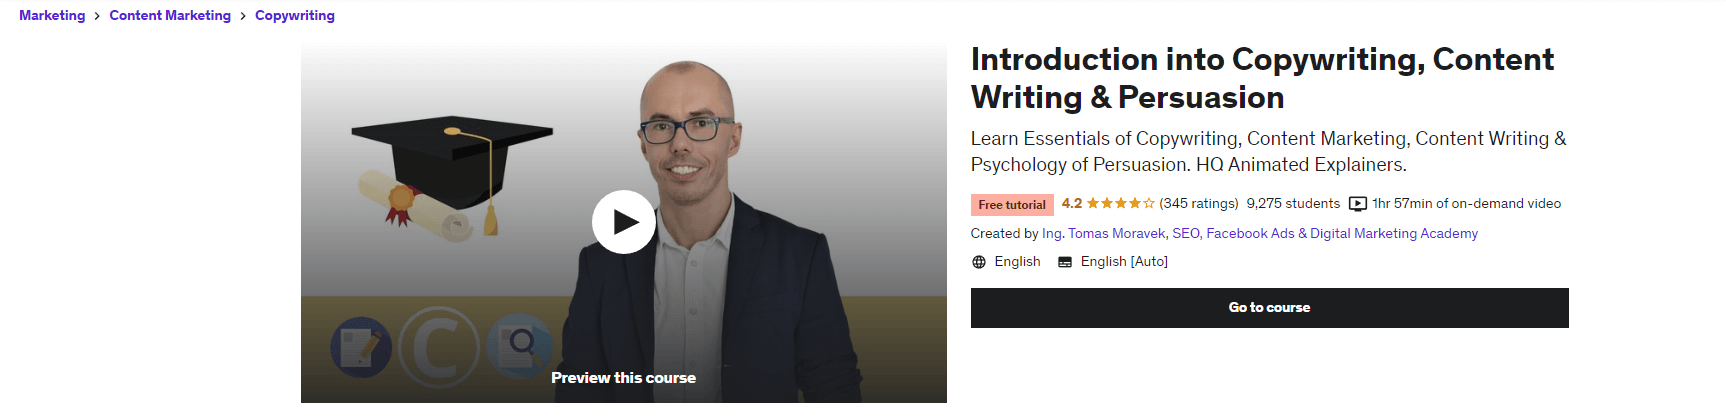 Introduction to Copywriting course homepage.